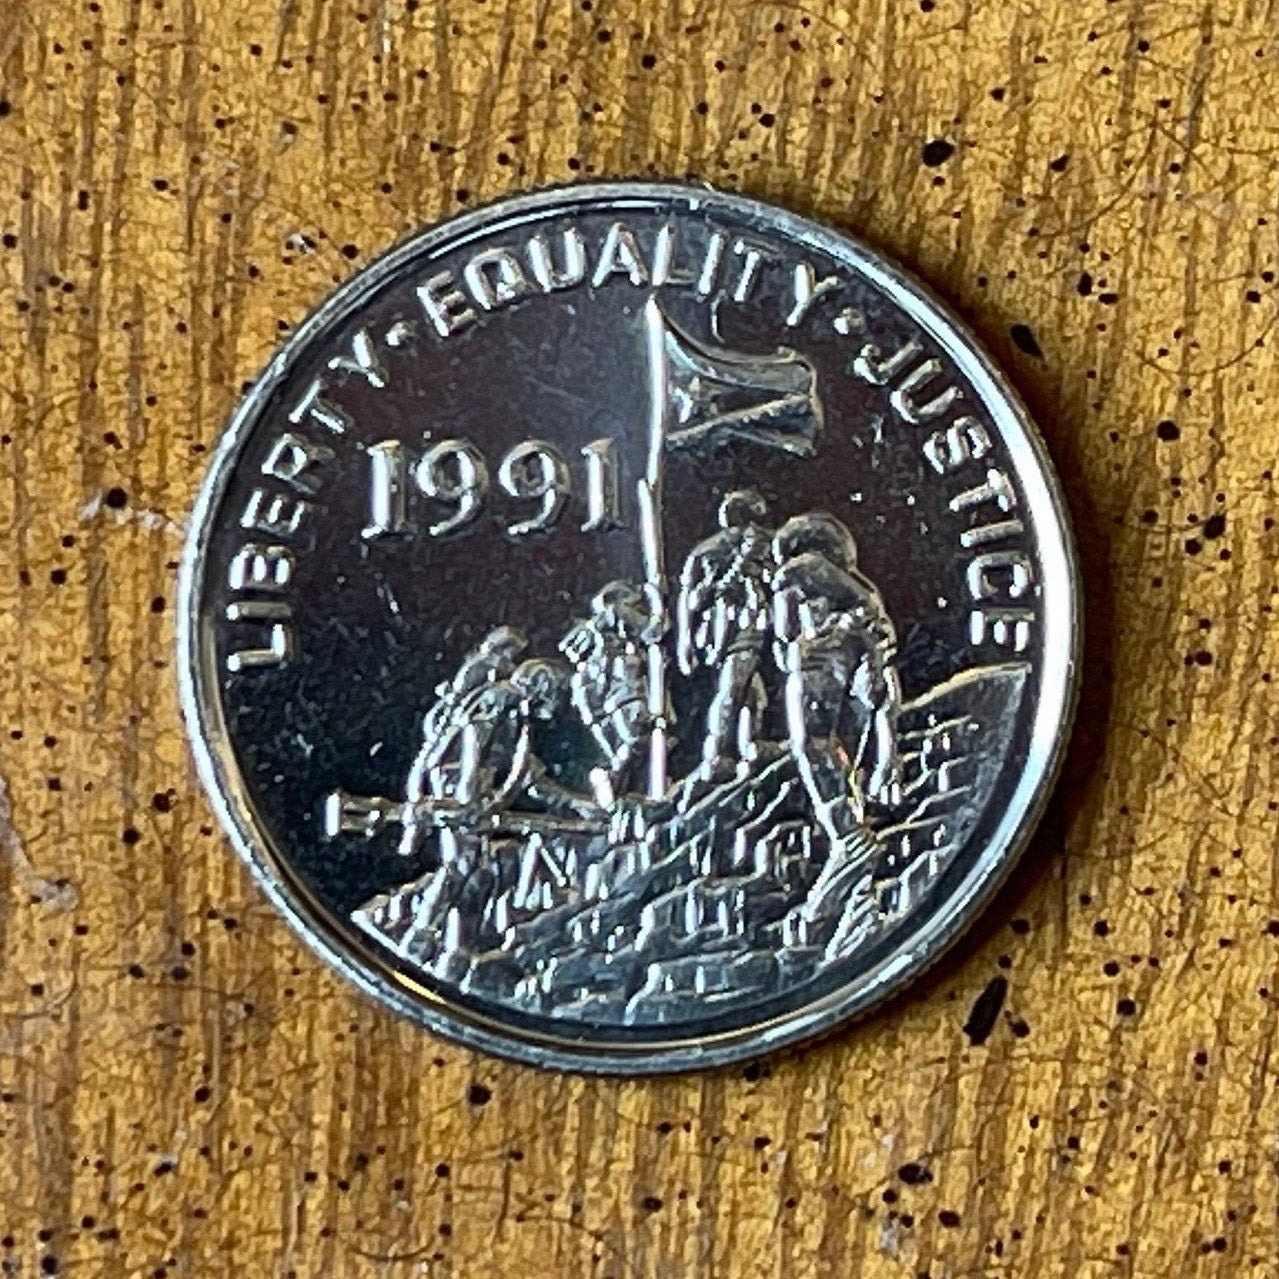 Leopard & Liberty Equality Justice Eritrea 5 Cents Authentic Coin Money for Jewelry and Craft Making